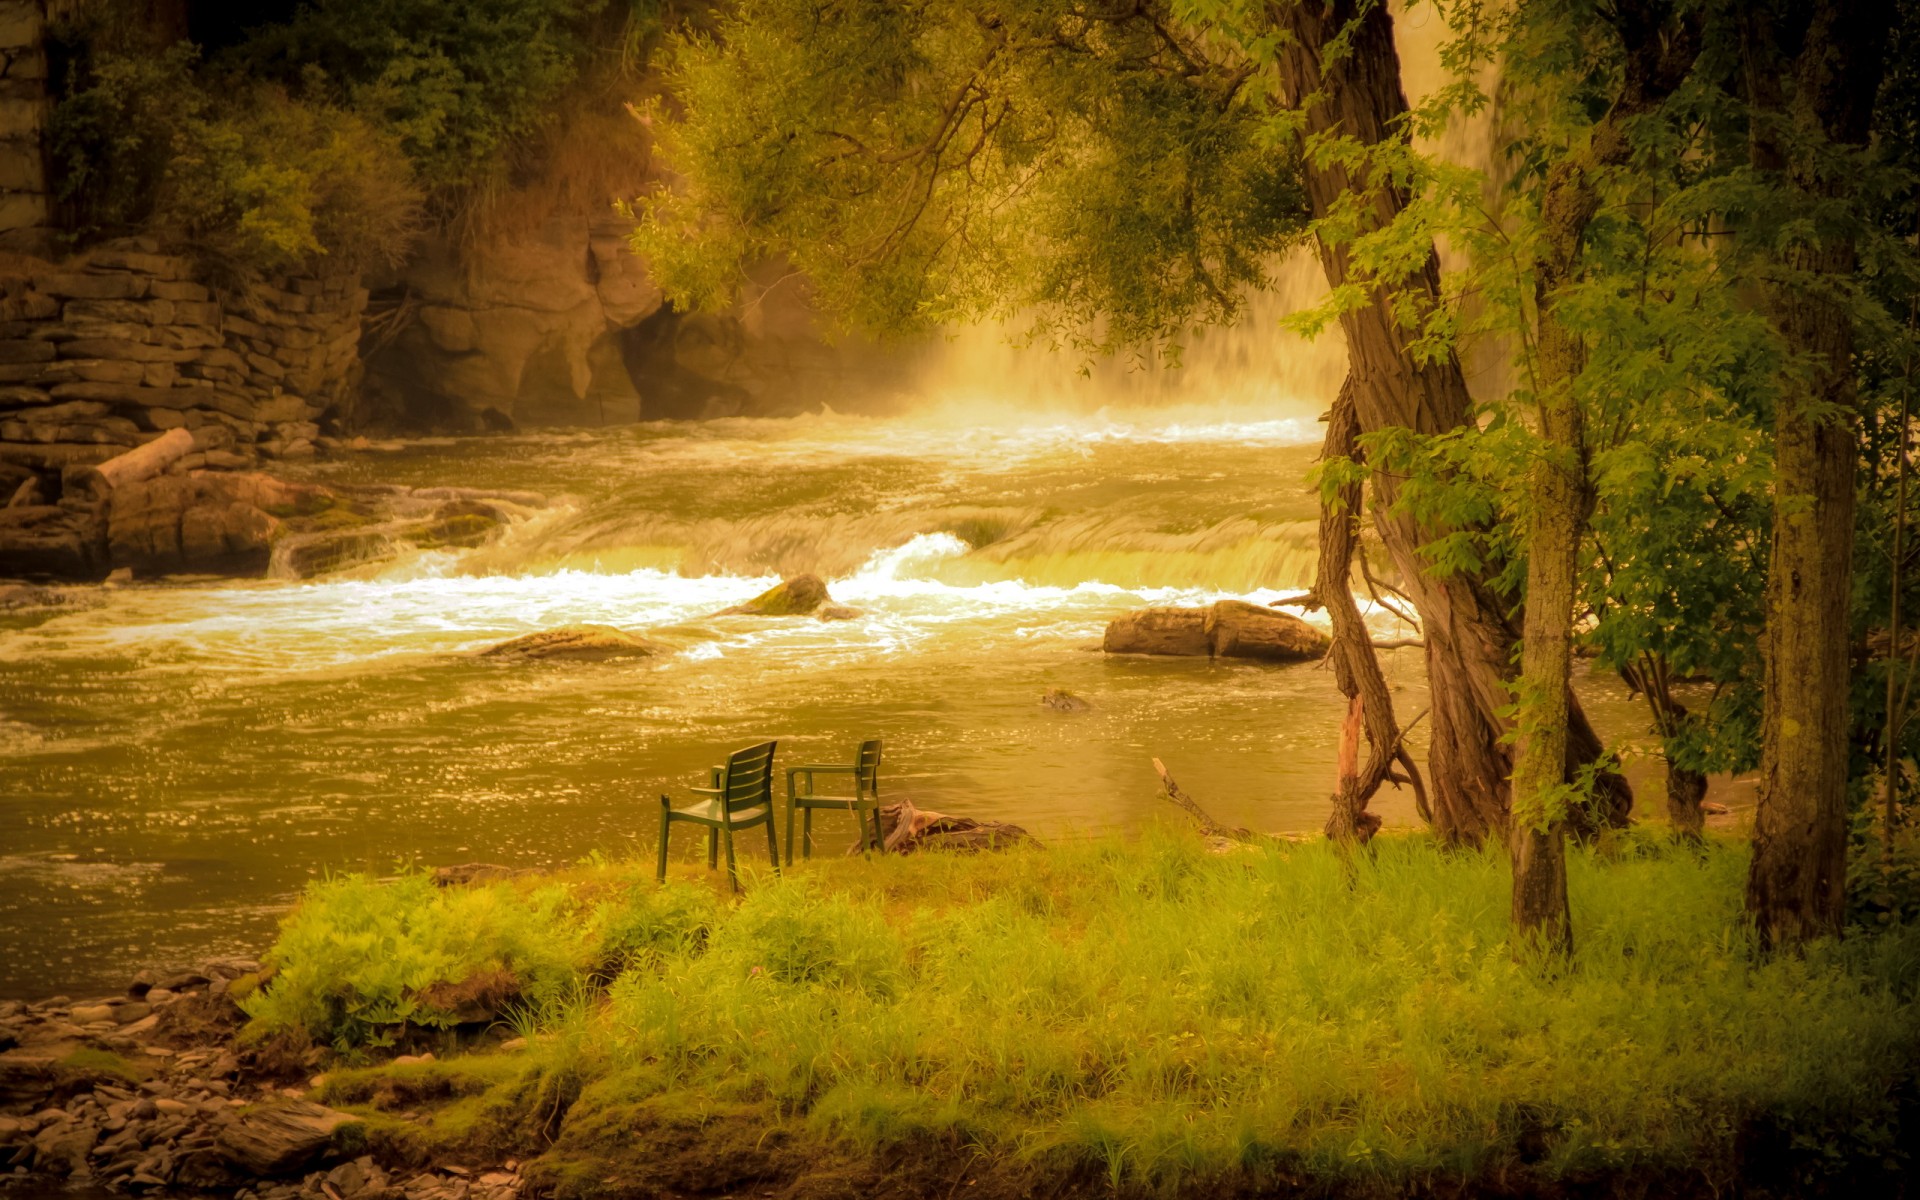 mood, Bench, Rustic, Chair, Nature, Landscapes, Rivers, Waterfall, Rapids, Trees, Forest, Shore, Fishing, Fog Wallpaper